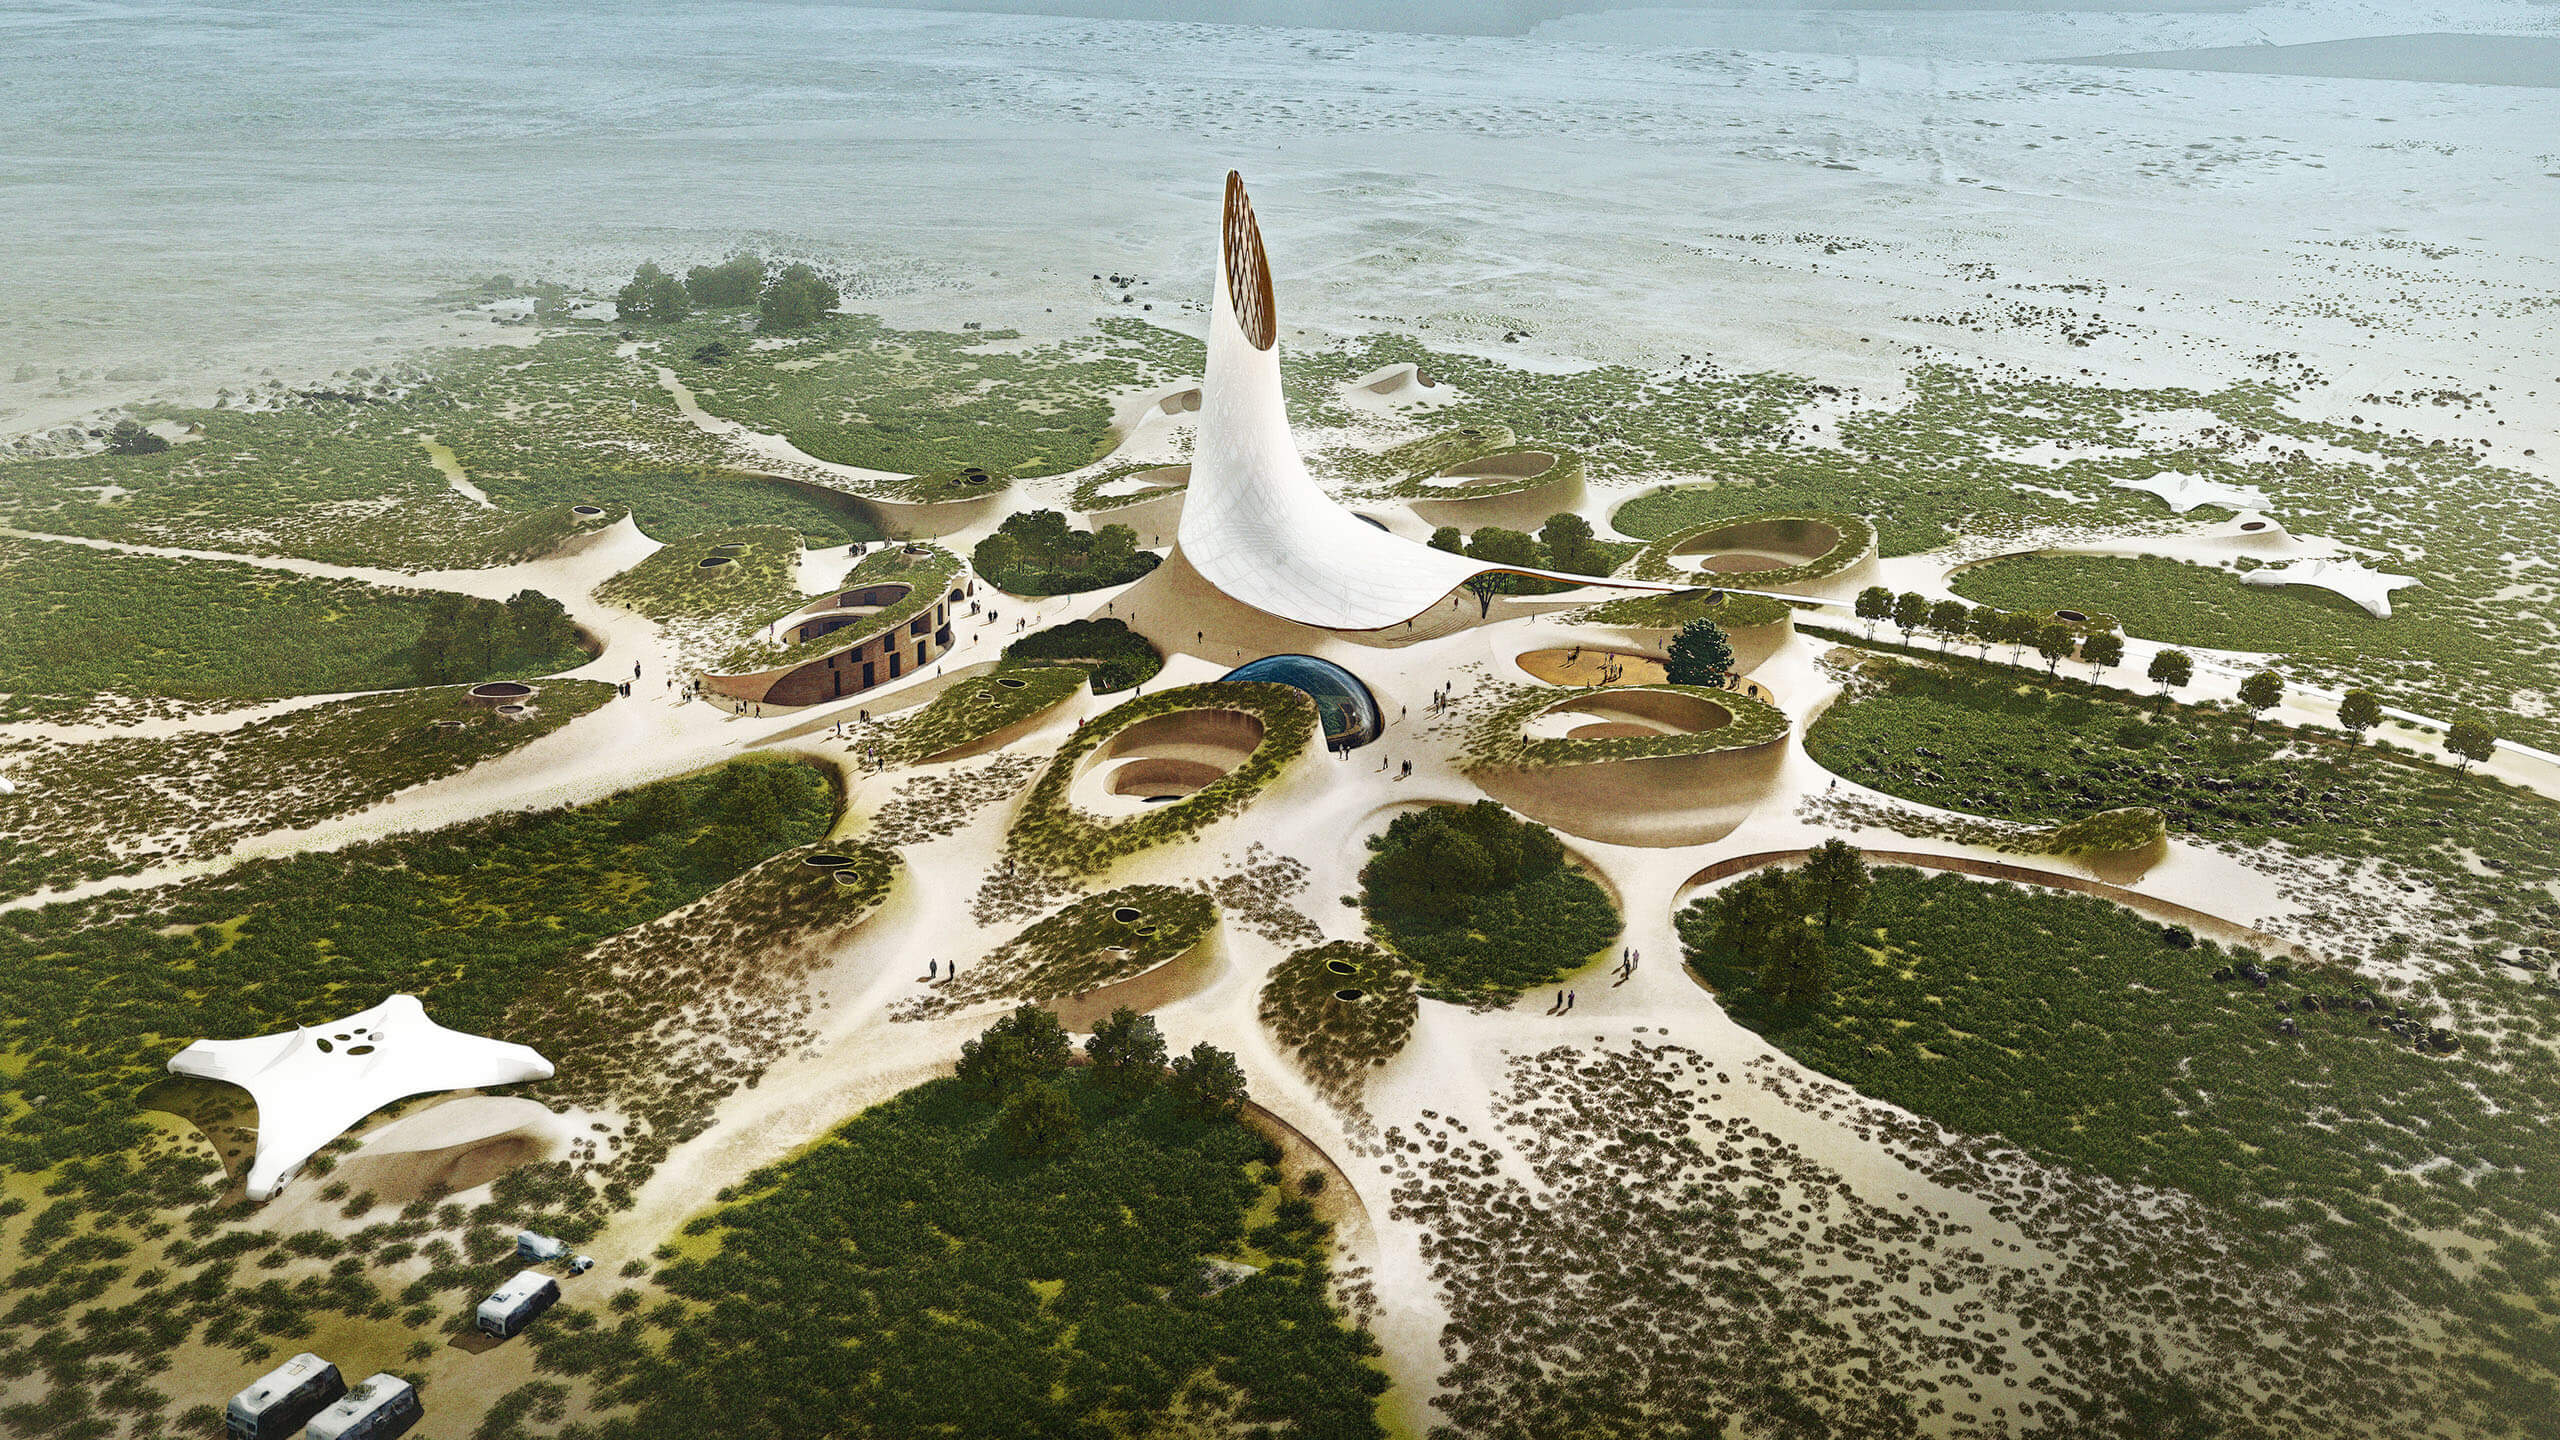 illustration of a futuristic structure emerging from the desert landscape